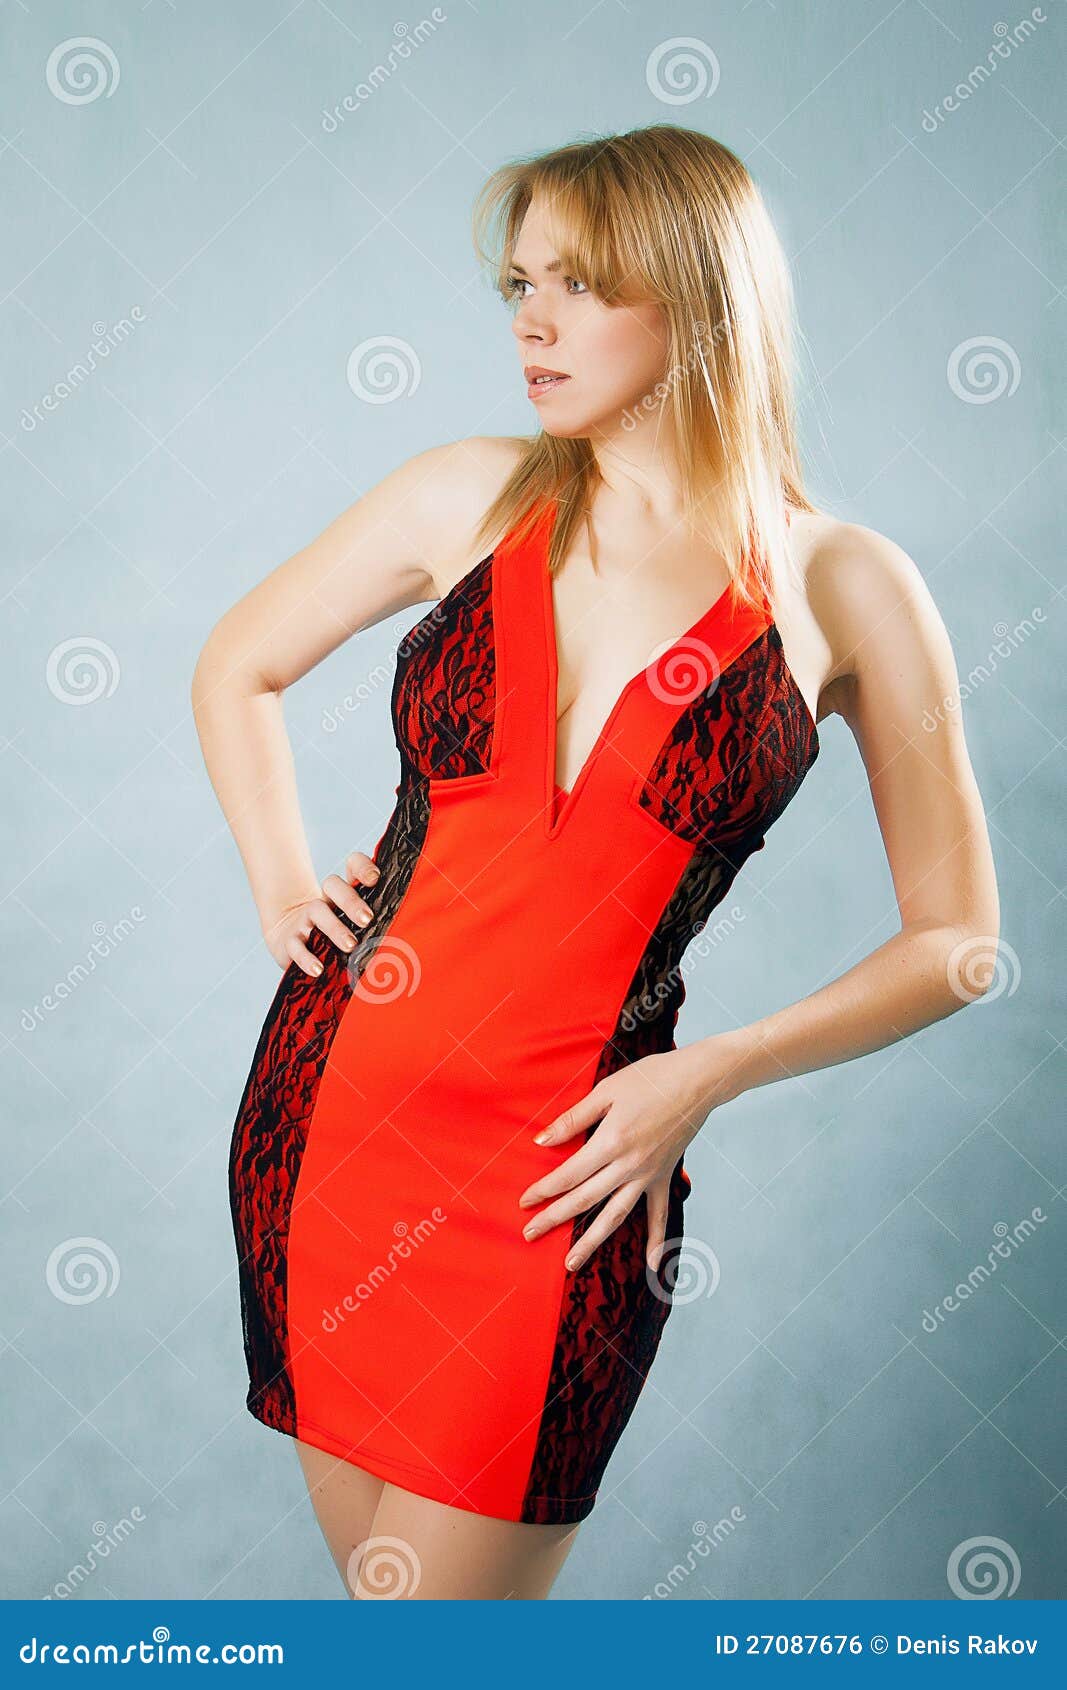 Beautiful Woman In Sexy Red Dress Royalty Free Stock Image